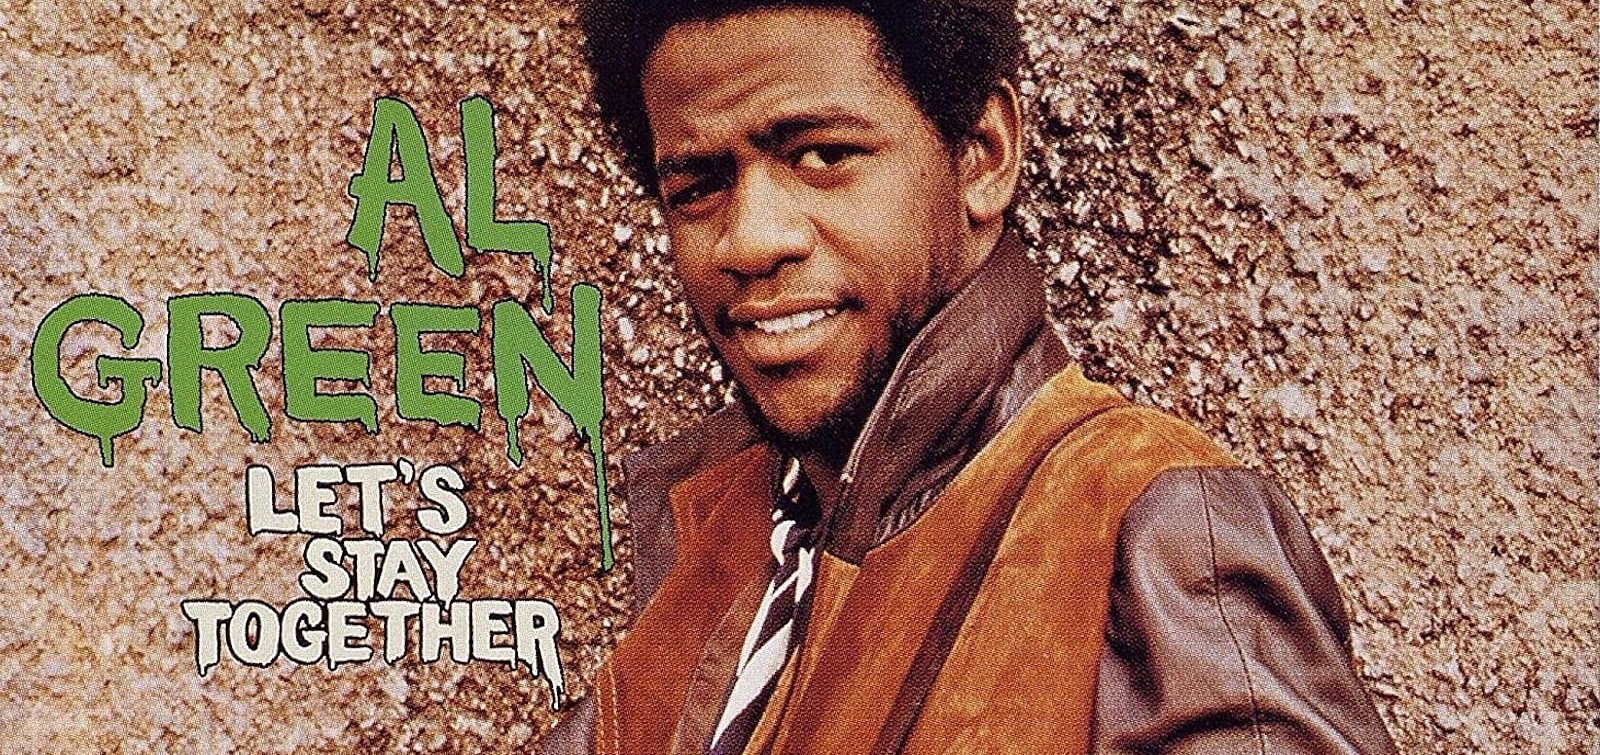 Just Like Al Green Sang, Let’s Stay Together – Our Customers Agree!